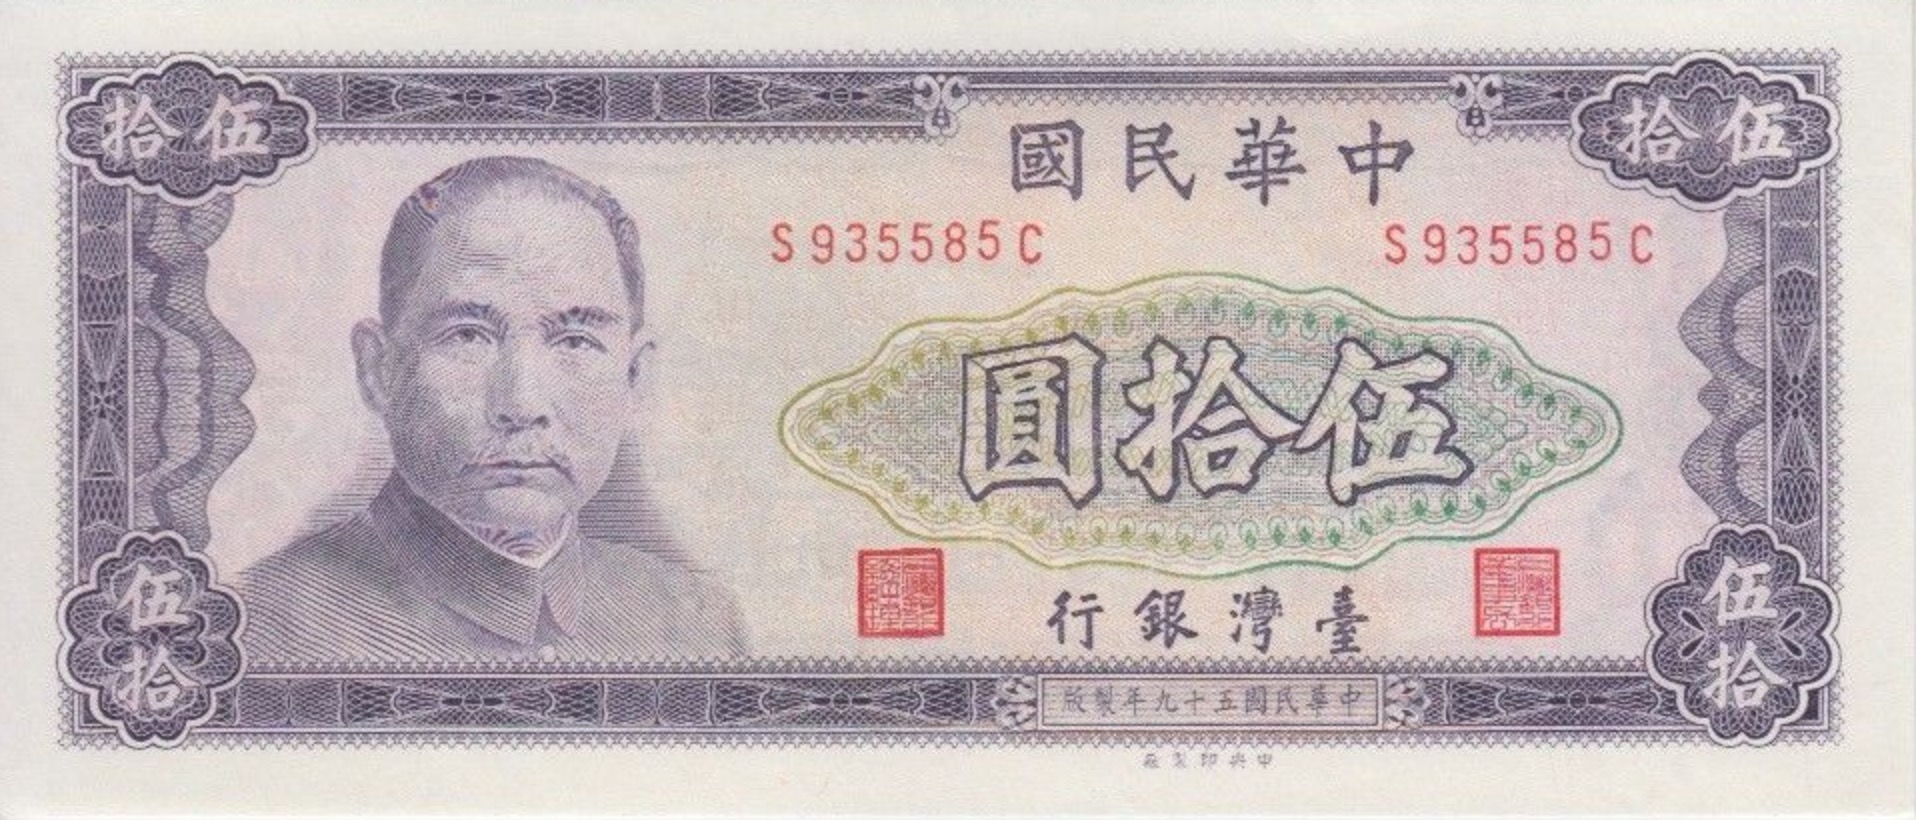 50 New Taiwan Dollars banknote (1970 issue)